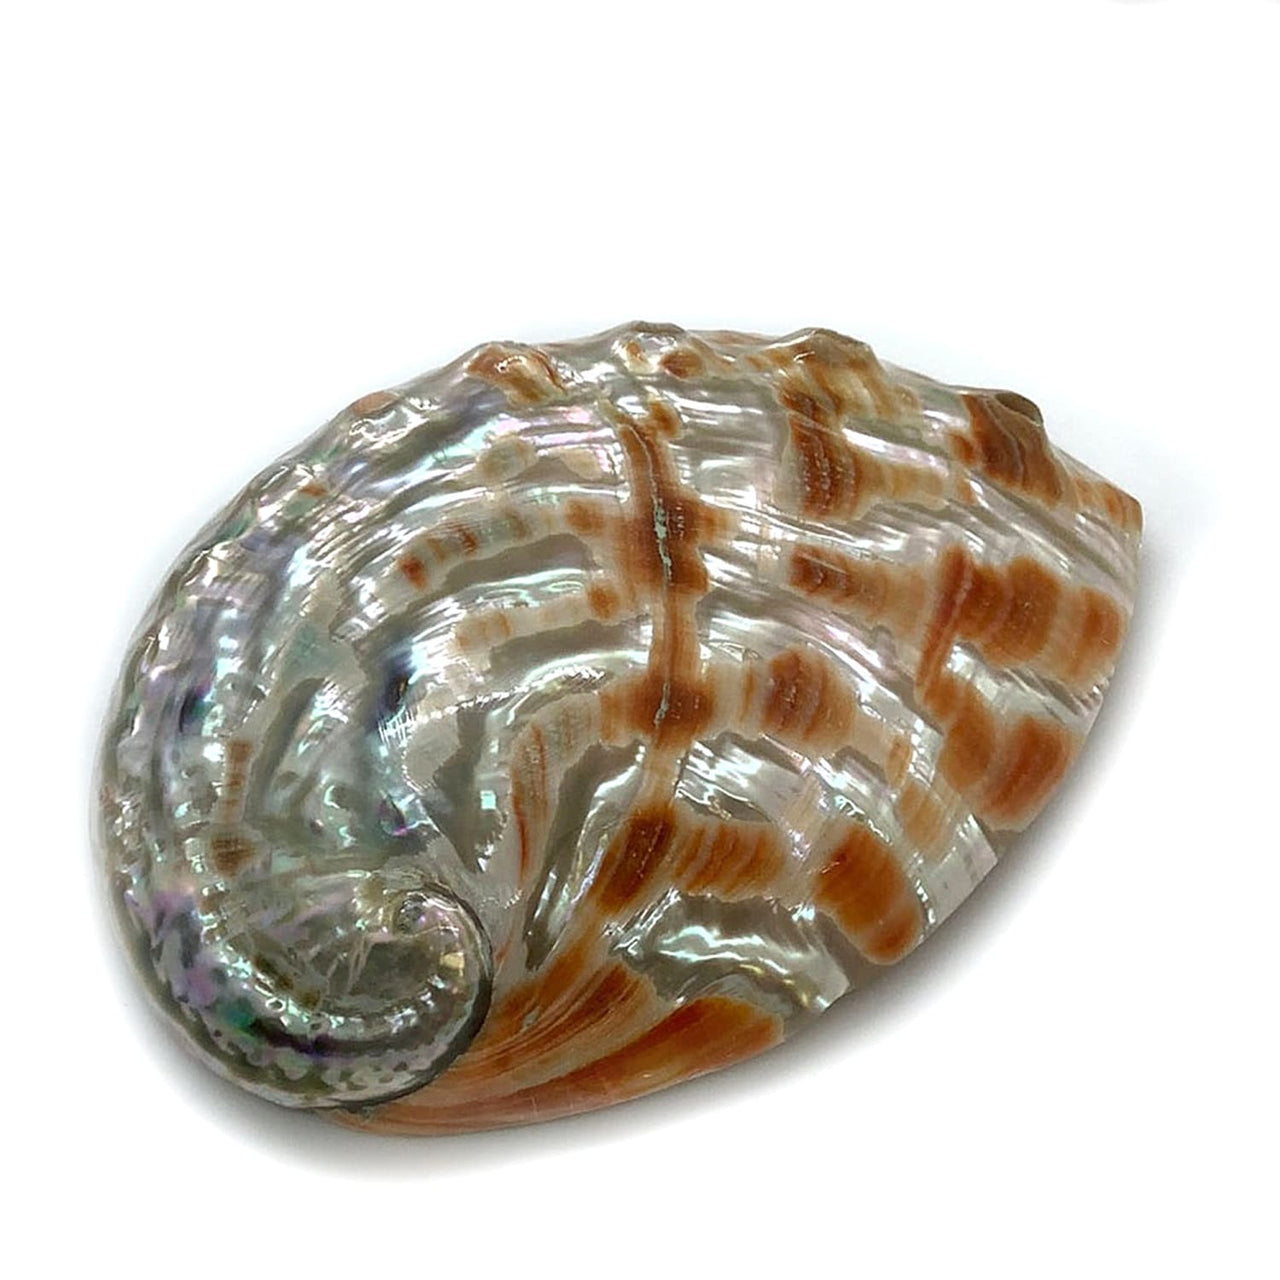 Red Abalone Shell Full Polished 6 for Smudging or Decor 